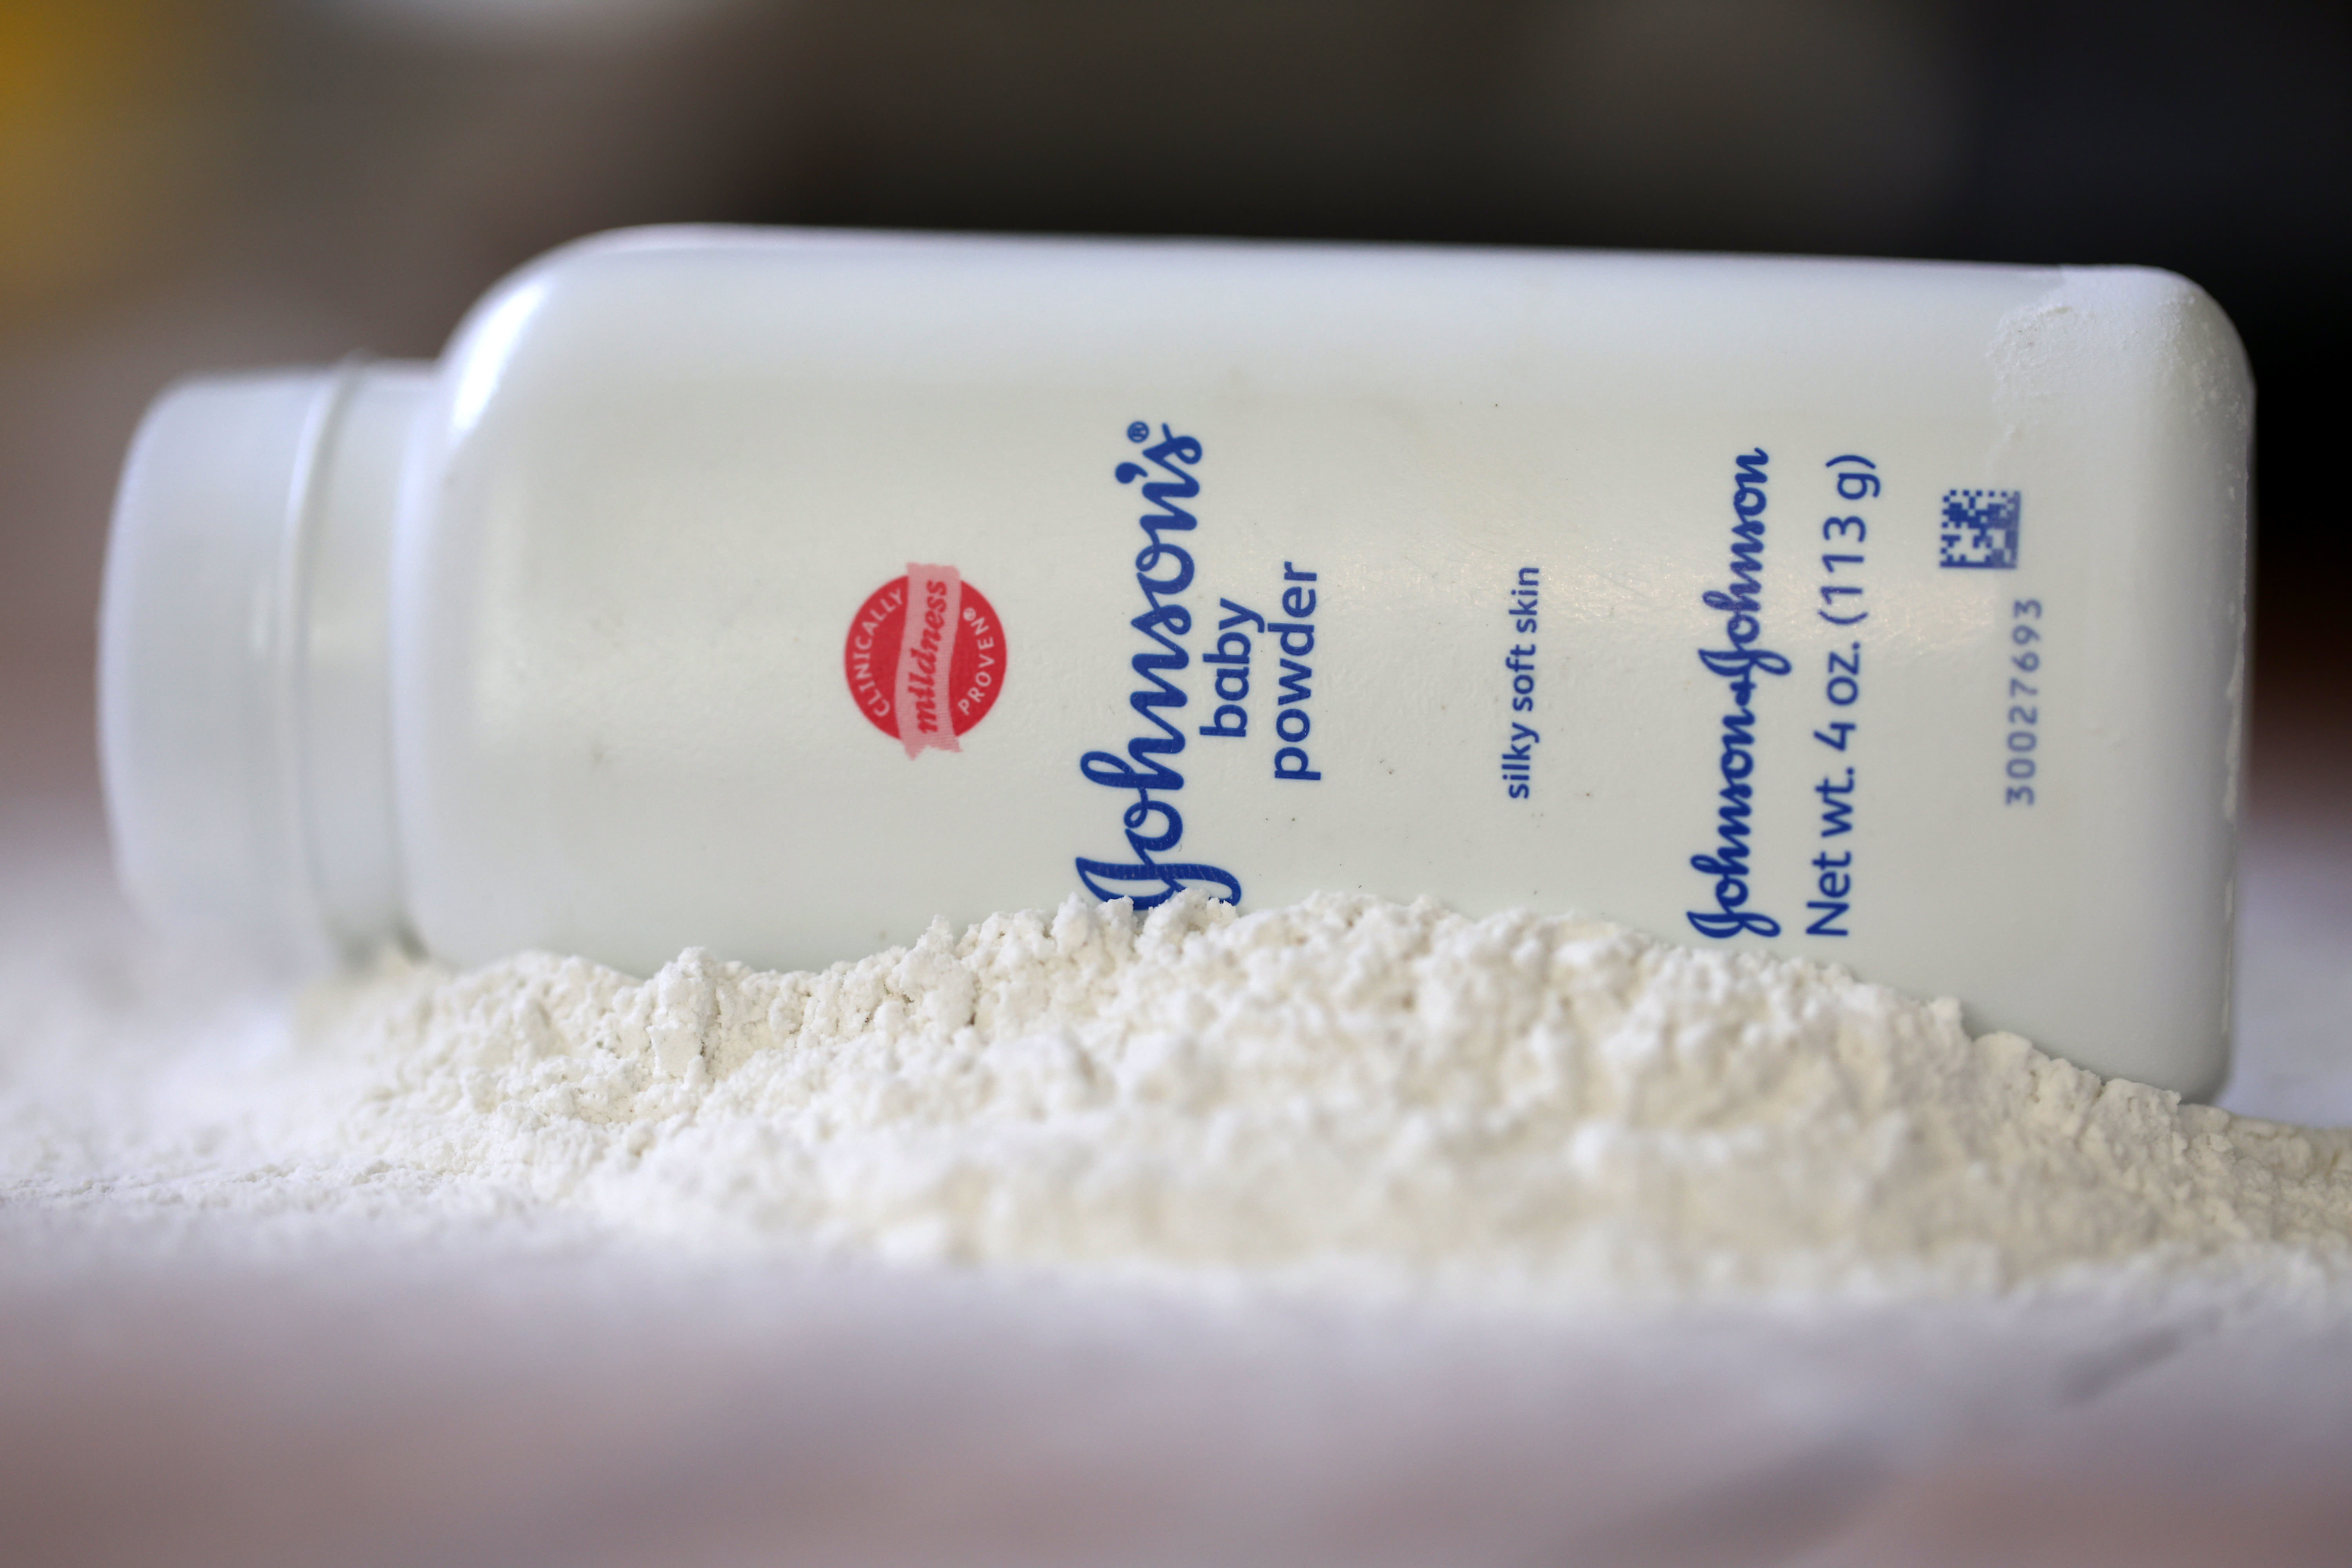 Here's what Jim Cramer thinks about J&J stock after a pivotal talc case verdict 